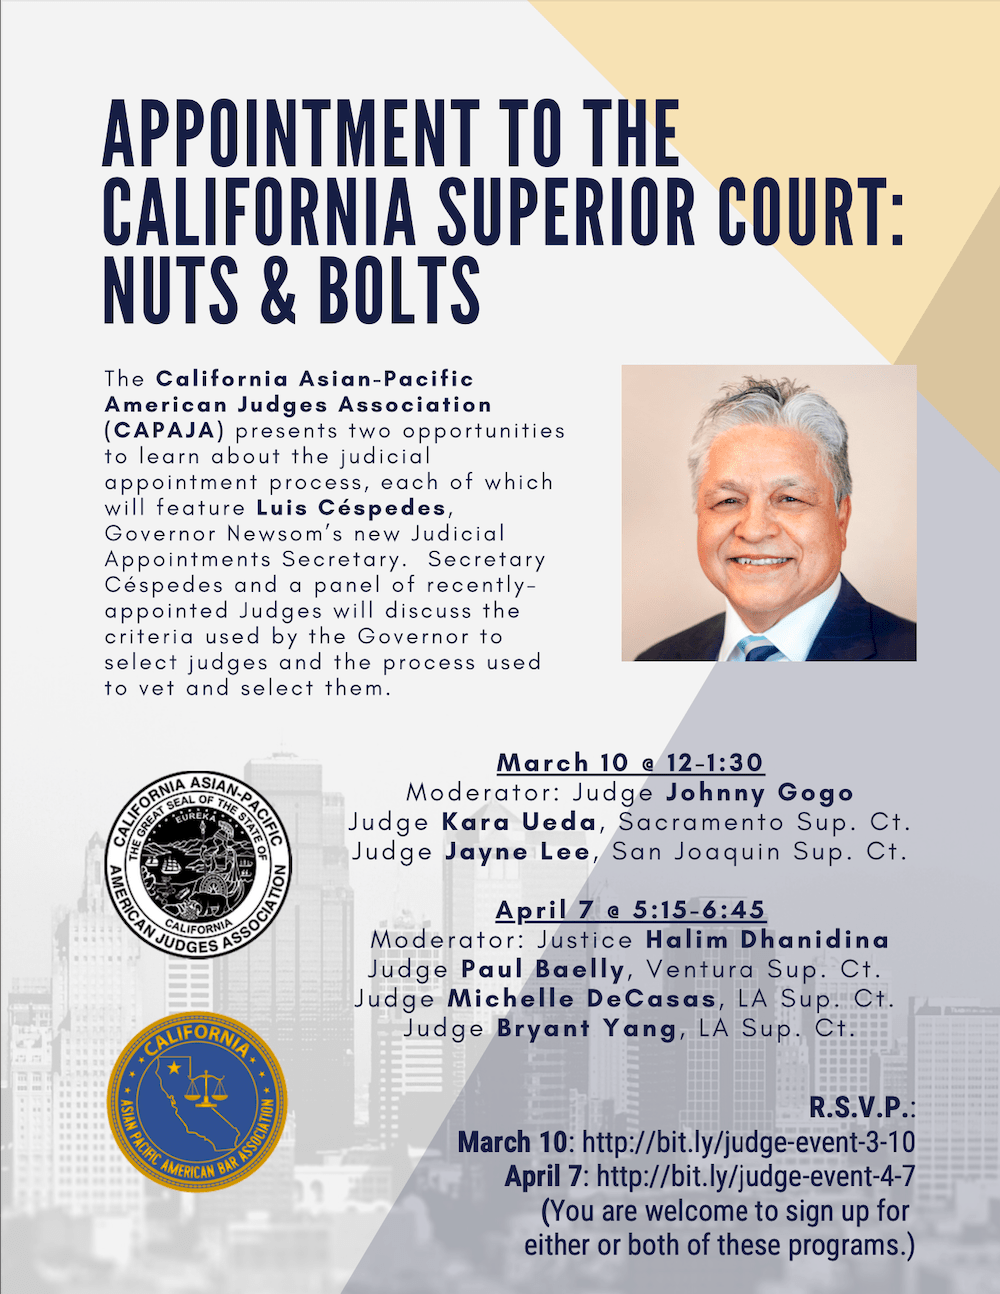 Appointment to the CA Superior Court - The Nuts and Bolts - April 7, 2021